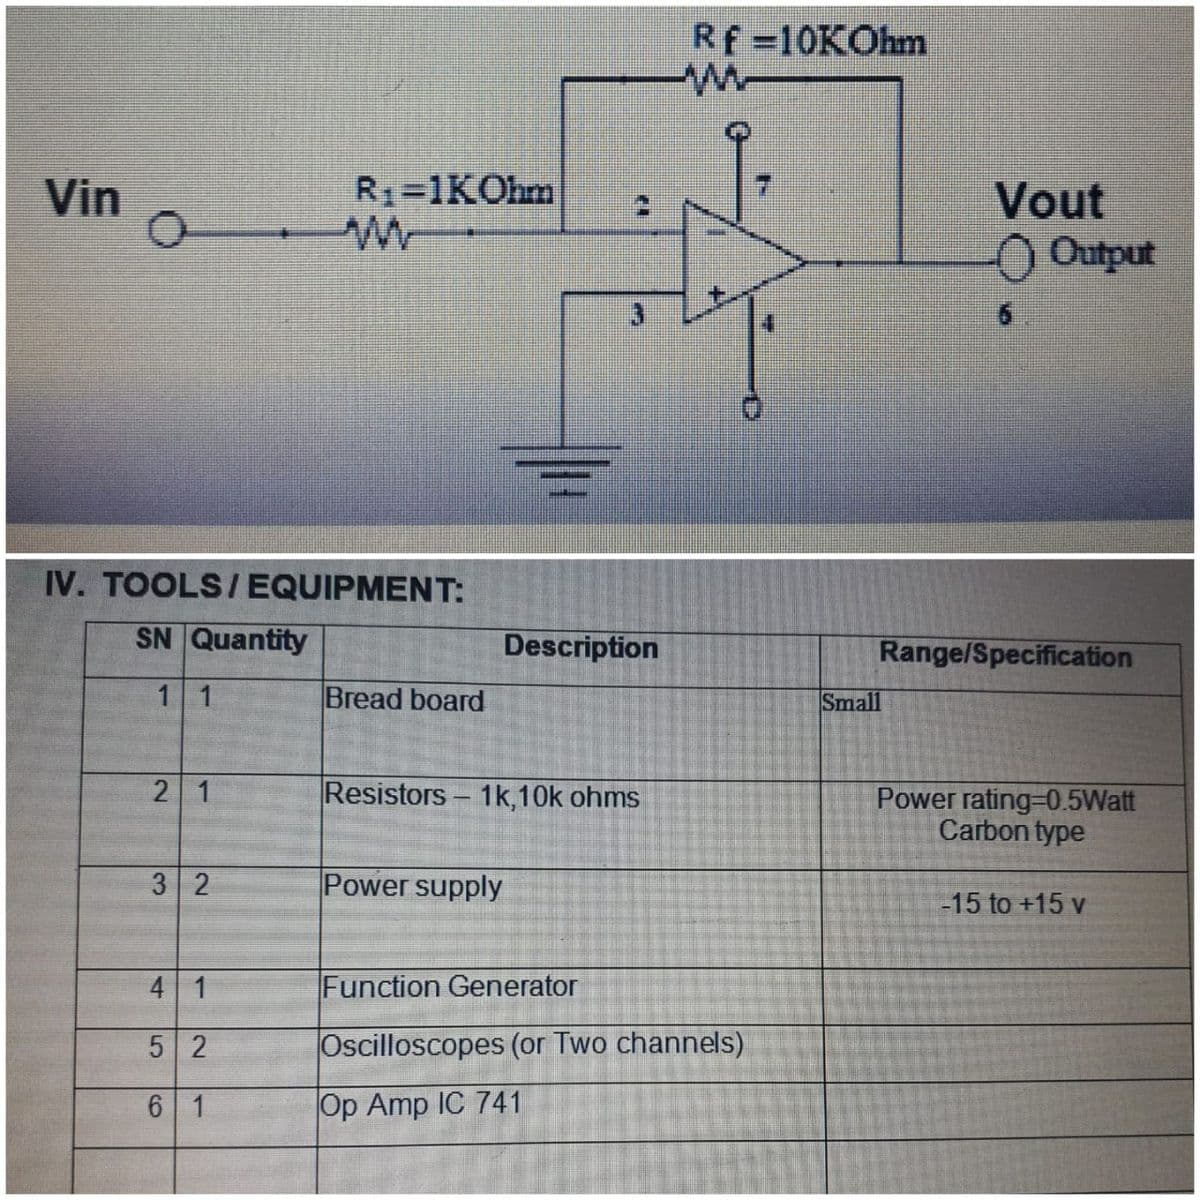 Rf-10KOhm
Vin
R:=1KOhm
Vout
0 Output
IV. TOOLS/ EQUIPMENT:
SN Quantity
Description
Range/Specification
1 1
Bread board
Small
2 1
Resistors- 1k,10k ohms
Power rating-0.5Watt
Carbon type
3 2
Power supply
-15 to +15 v
4 1
Function Generator
5 2
Oscilloscopes (or Two channels)
6 1
Op Amp IC 741
